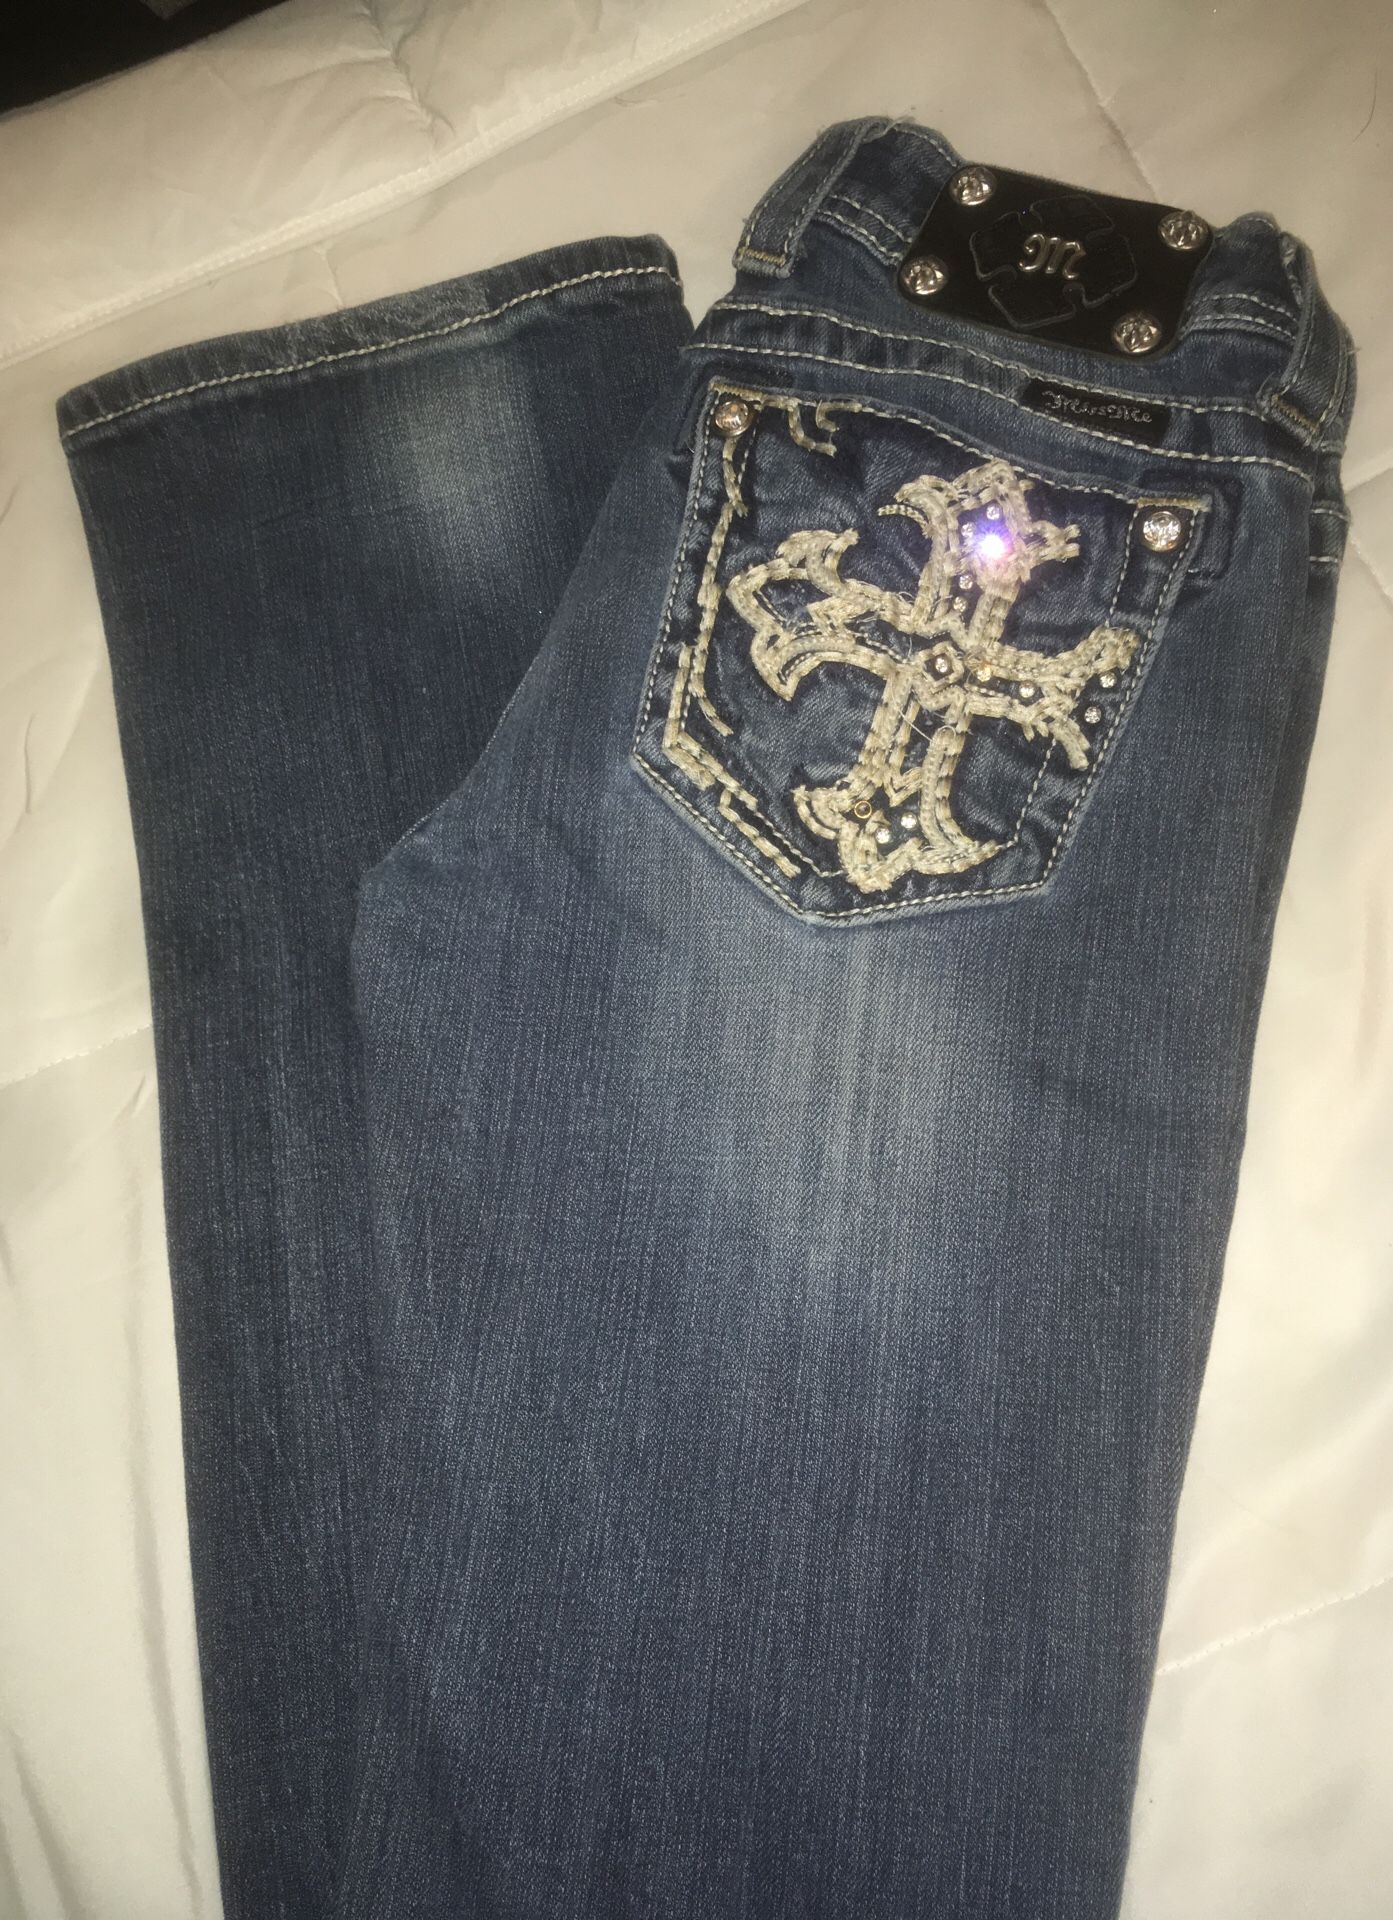 Miss me jeans size 27 boot cut